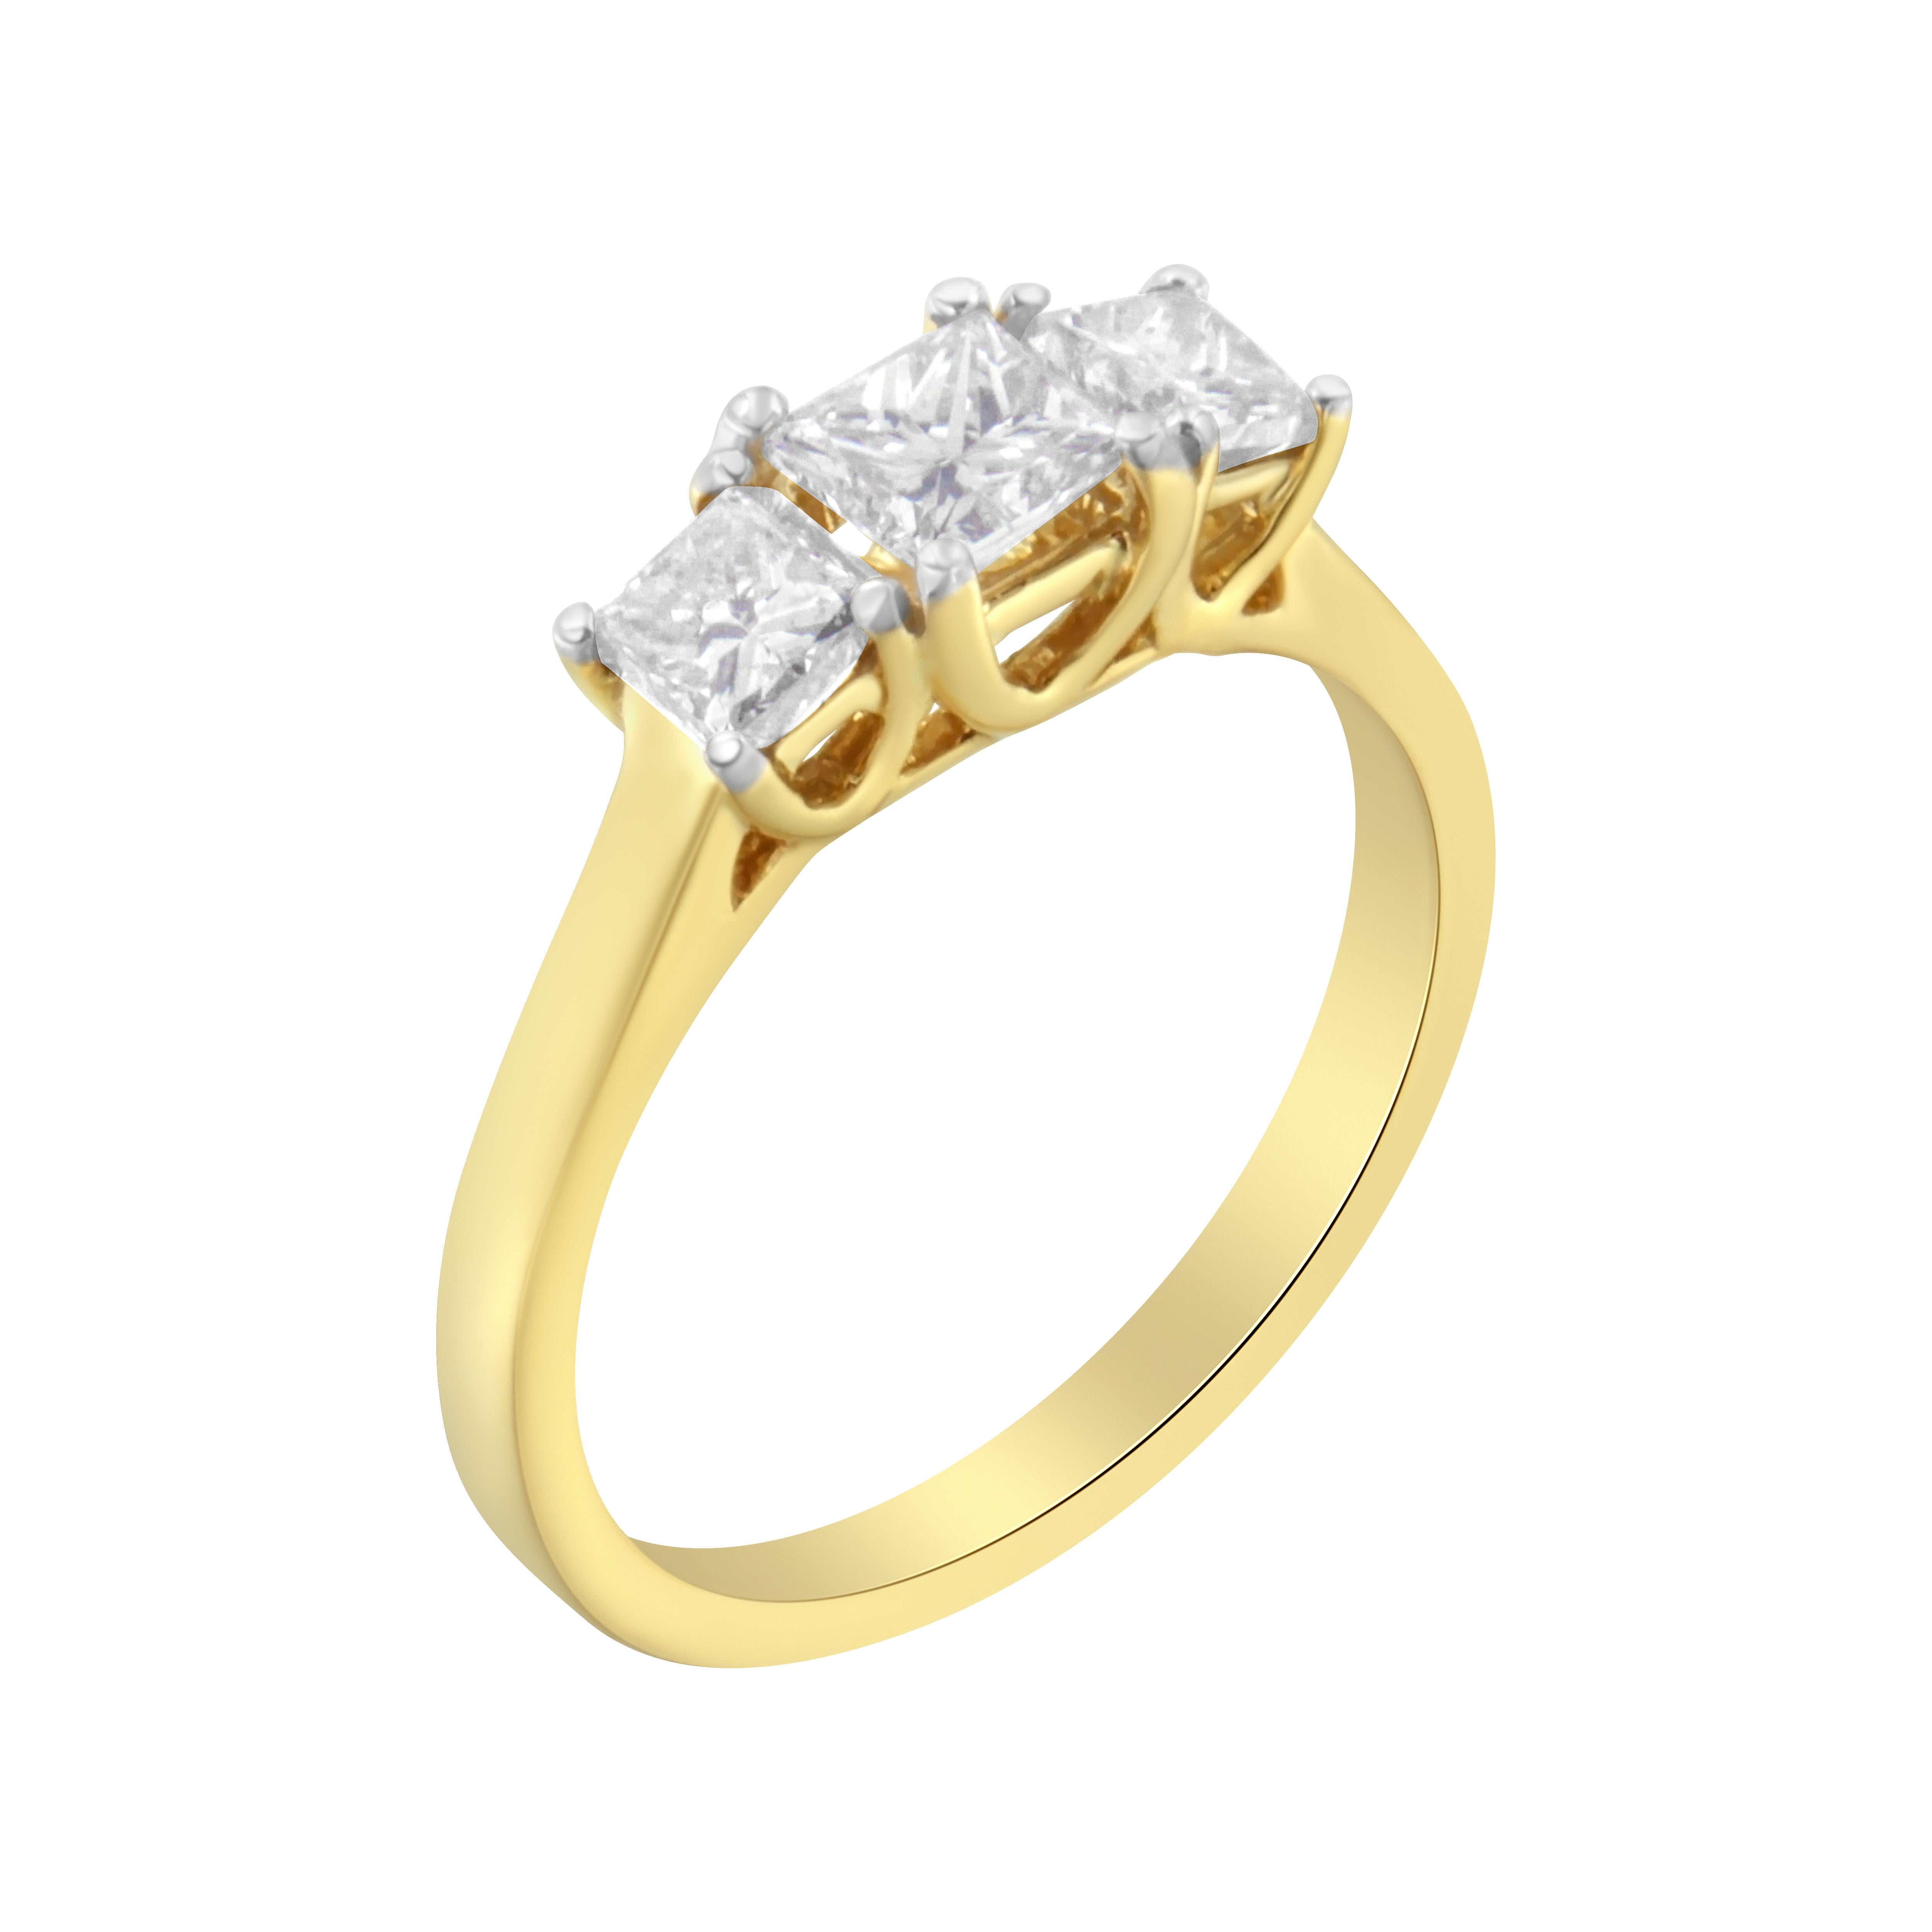 A three stone diamond ring that is delicately designed with three natural, sparkling princess-cut diamonds pring set in warm 10k Yellow Gold. The 3 princess cut diamonds add up to a stunning 1 carat diamond total weight. This ring is the perfect way